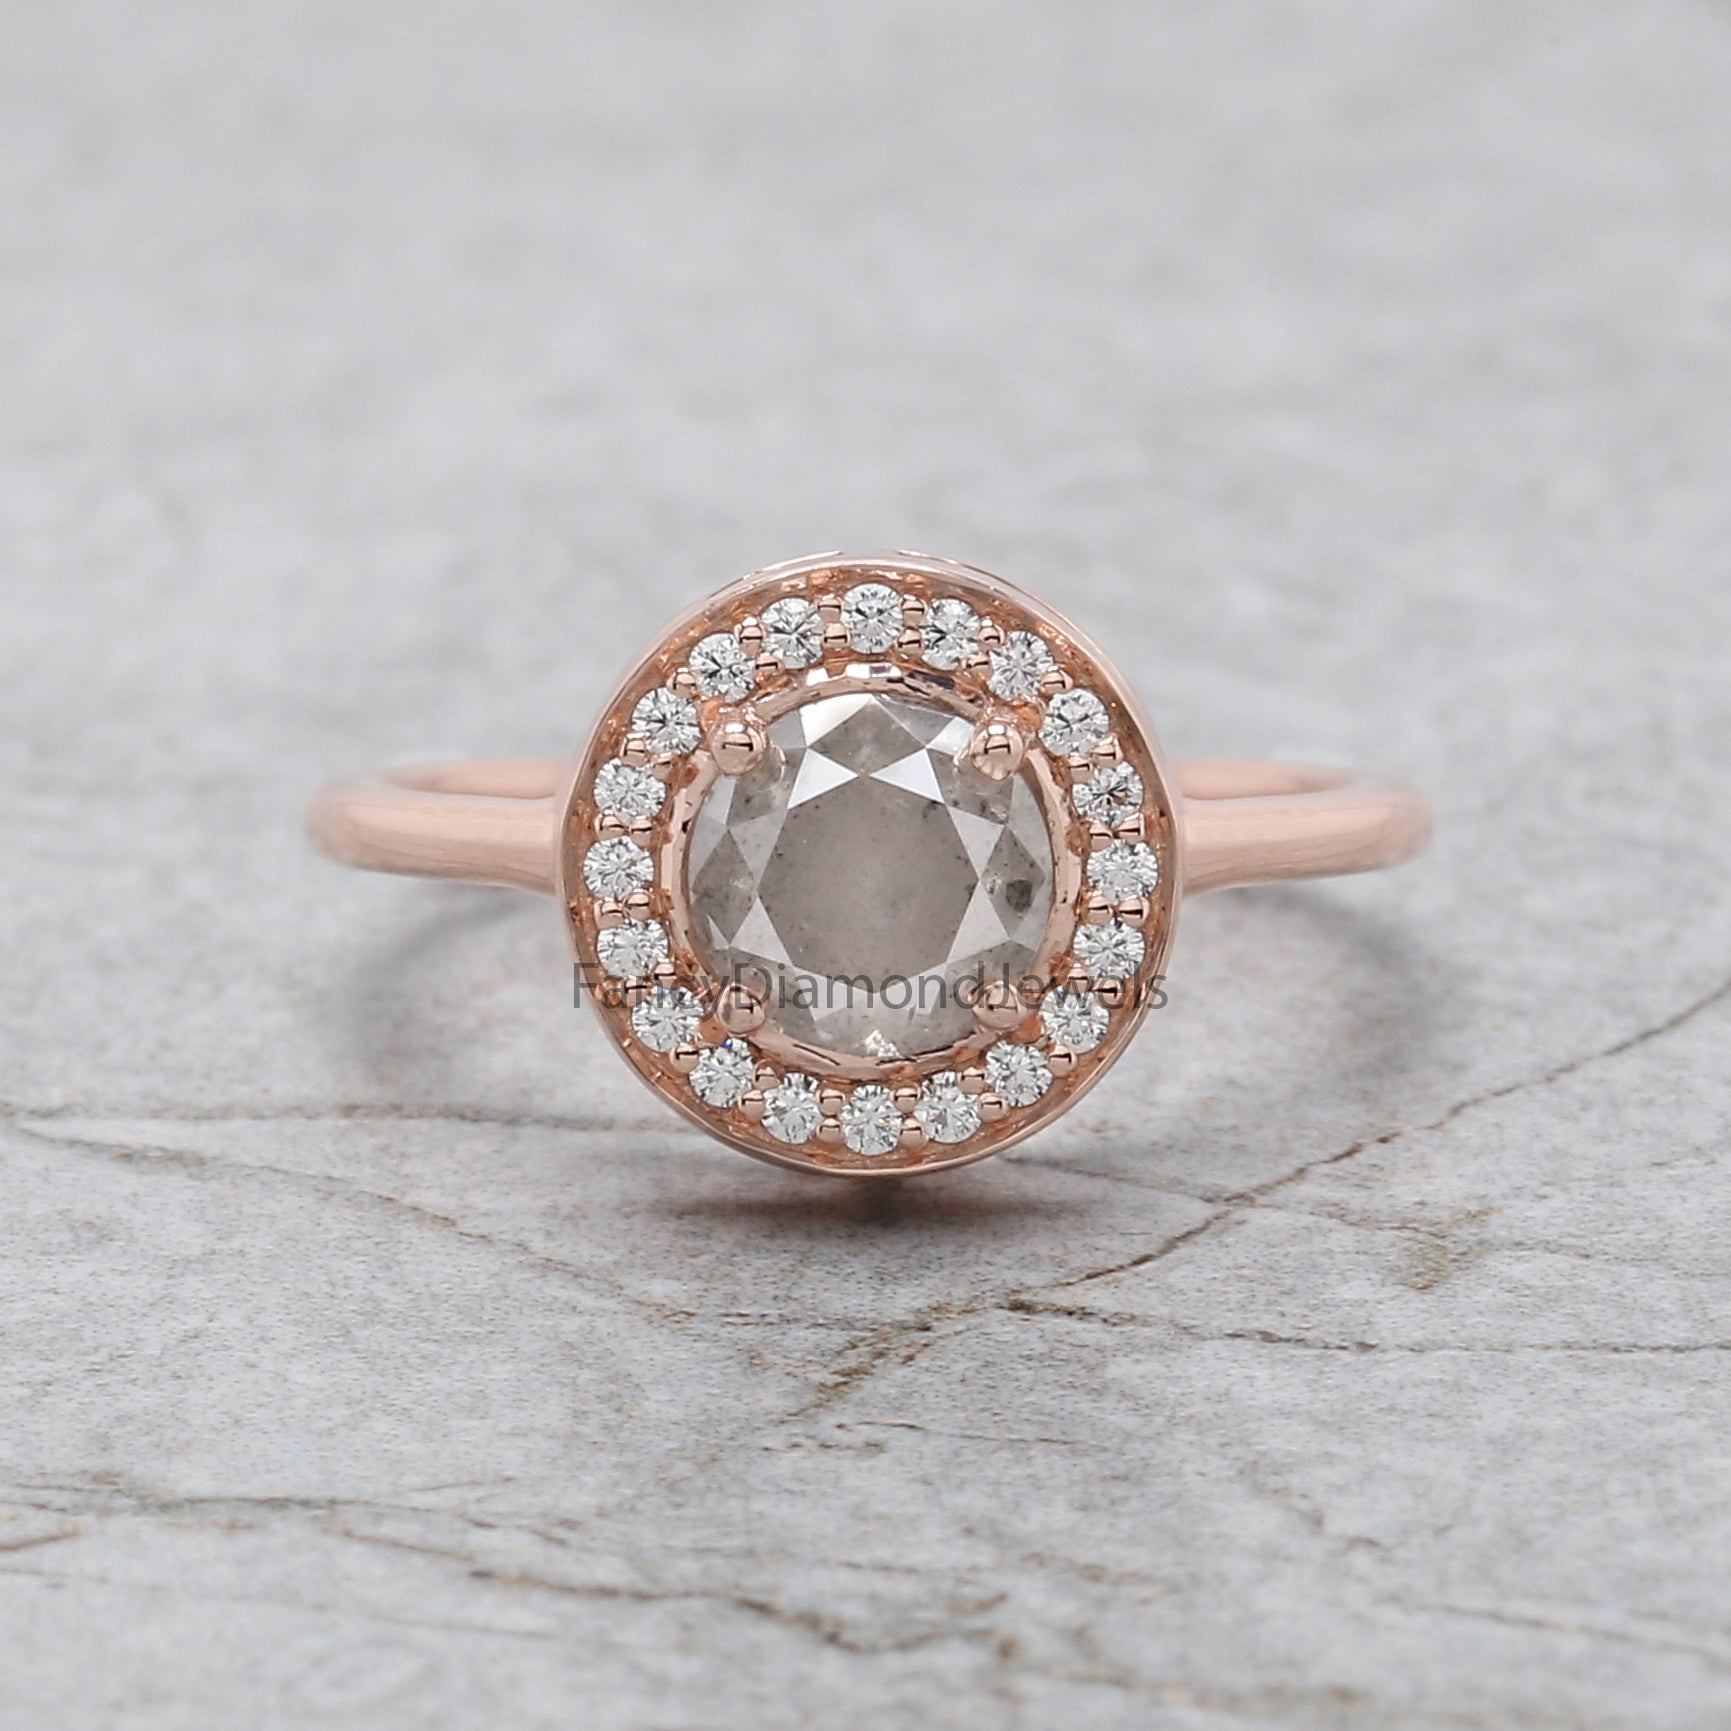 Round Cut Salt And Pepper Diamond Ring 1.25 Ct 6.15 MM Round Diamond Ring 14K Solid Rose Gold Silver Engagement Ring Gift For Her QN486